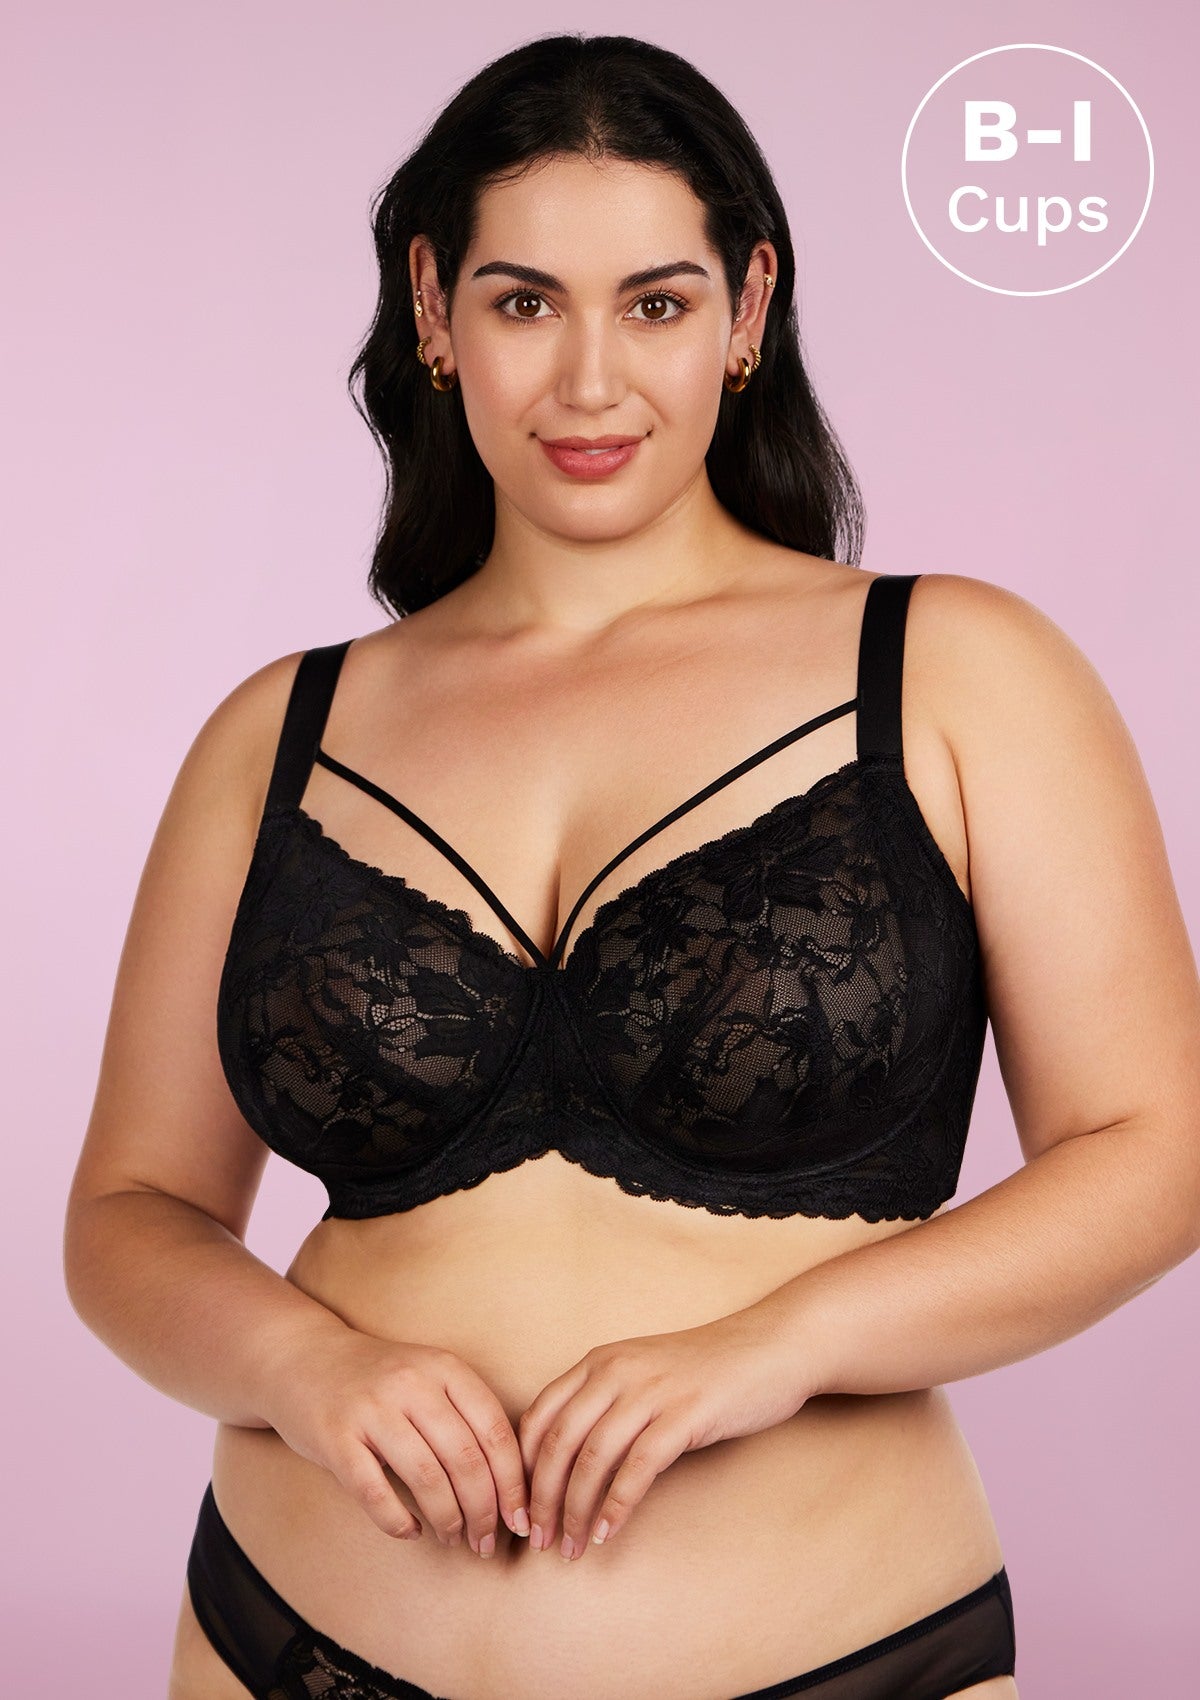 HSIA Pretty In Petals Lace Bra And Panty Set: Non Padded Wired Bra - Black / 32 / D